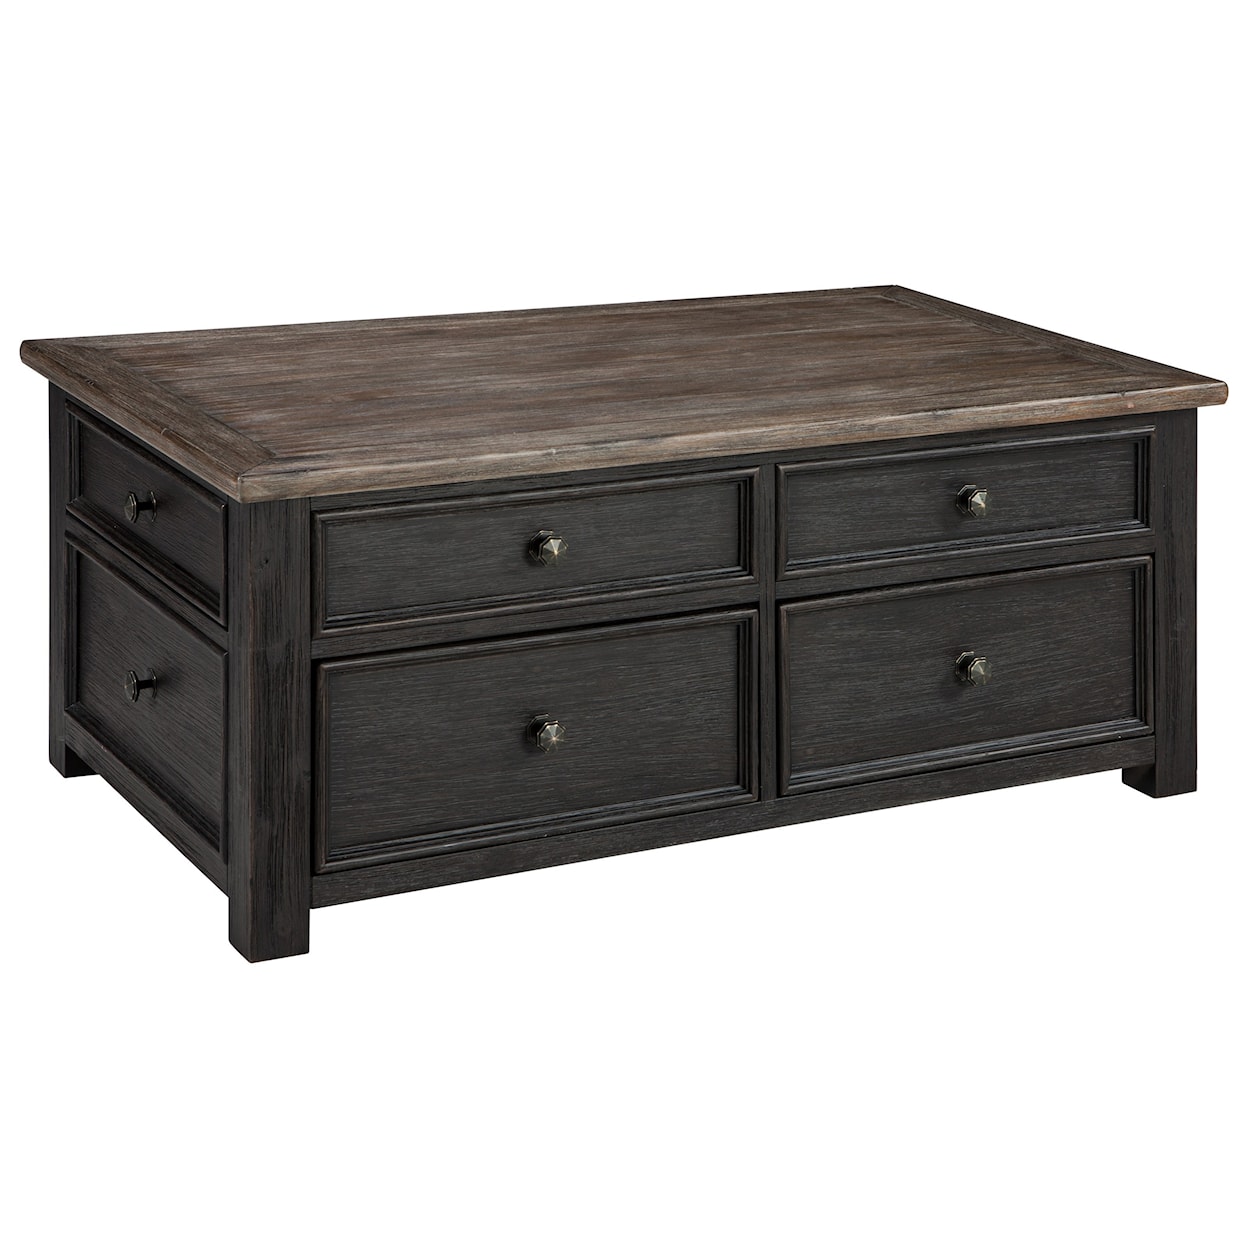 Ashley Furniture Signature Design Tyler Creek Lift Top Cocktail Table